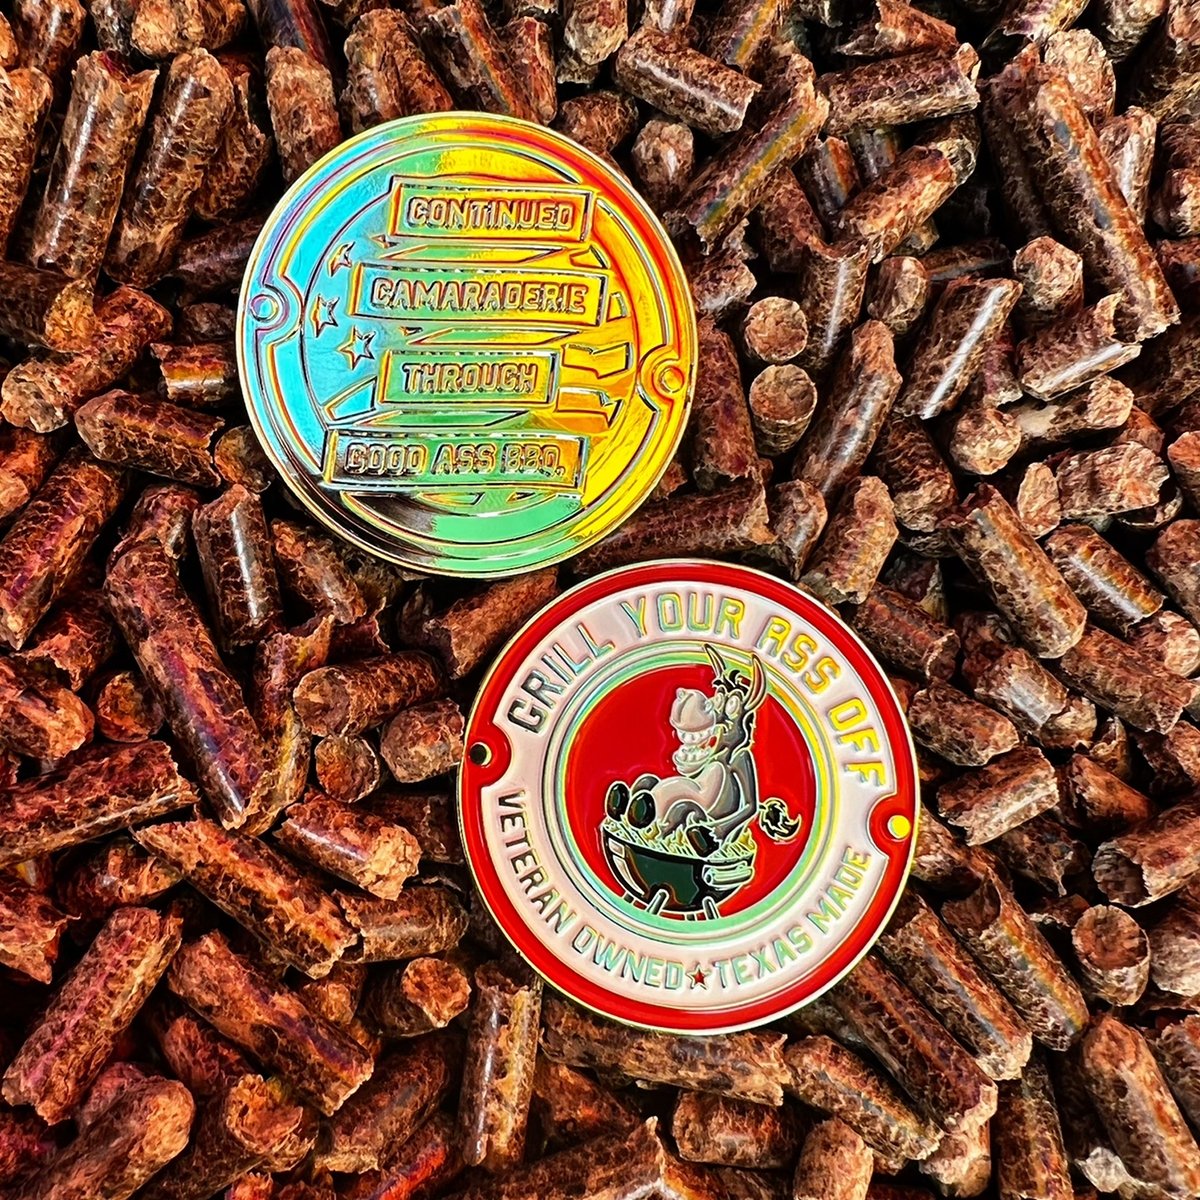 GYAO Challenge Coin - The Tool Store